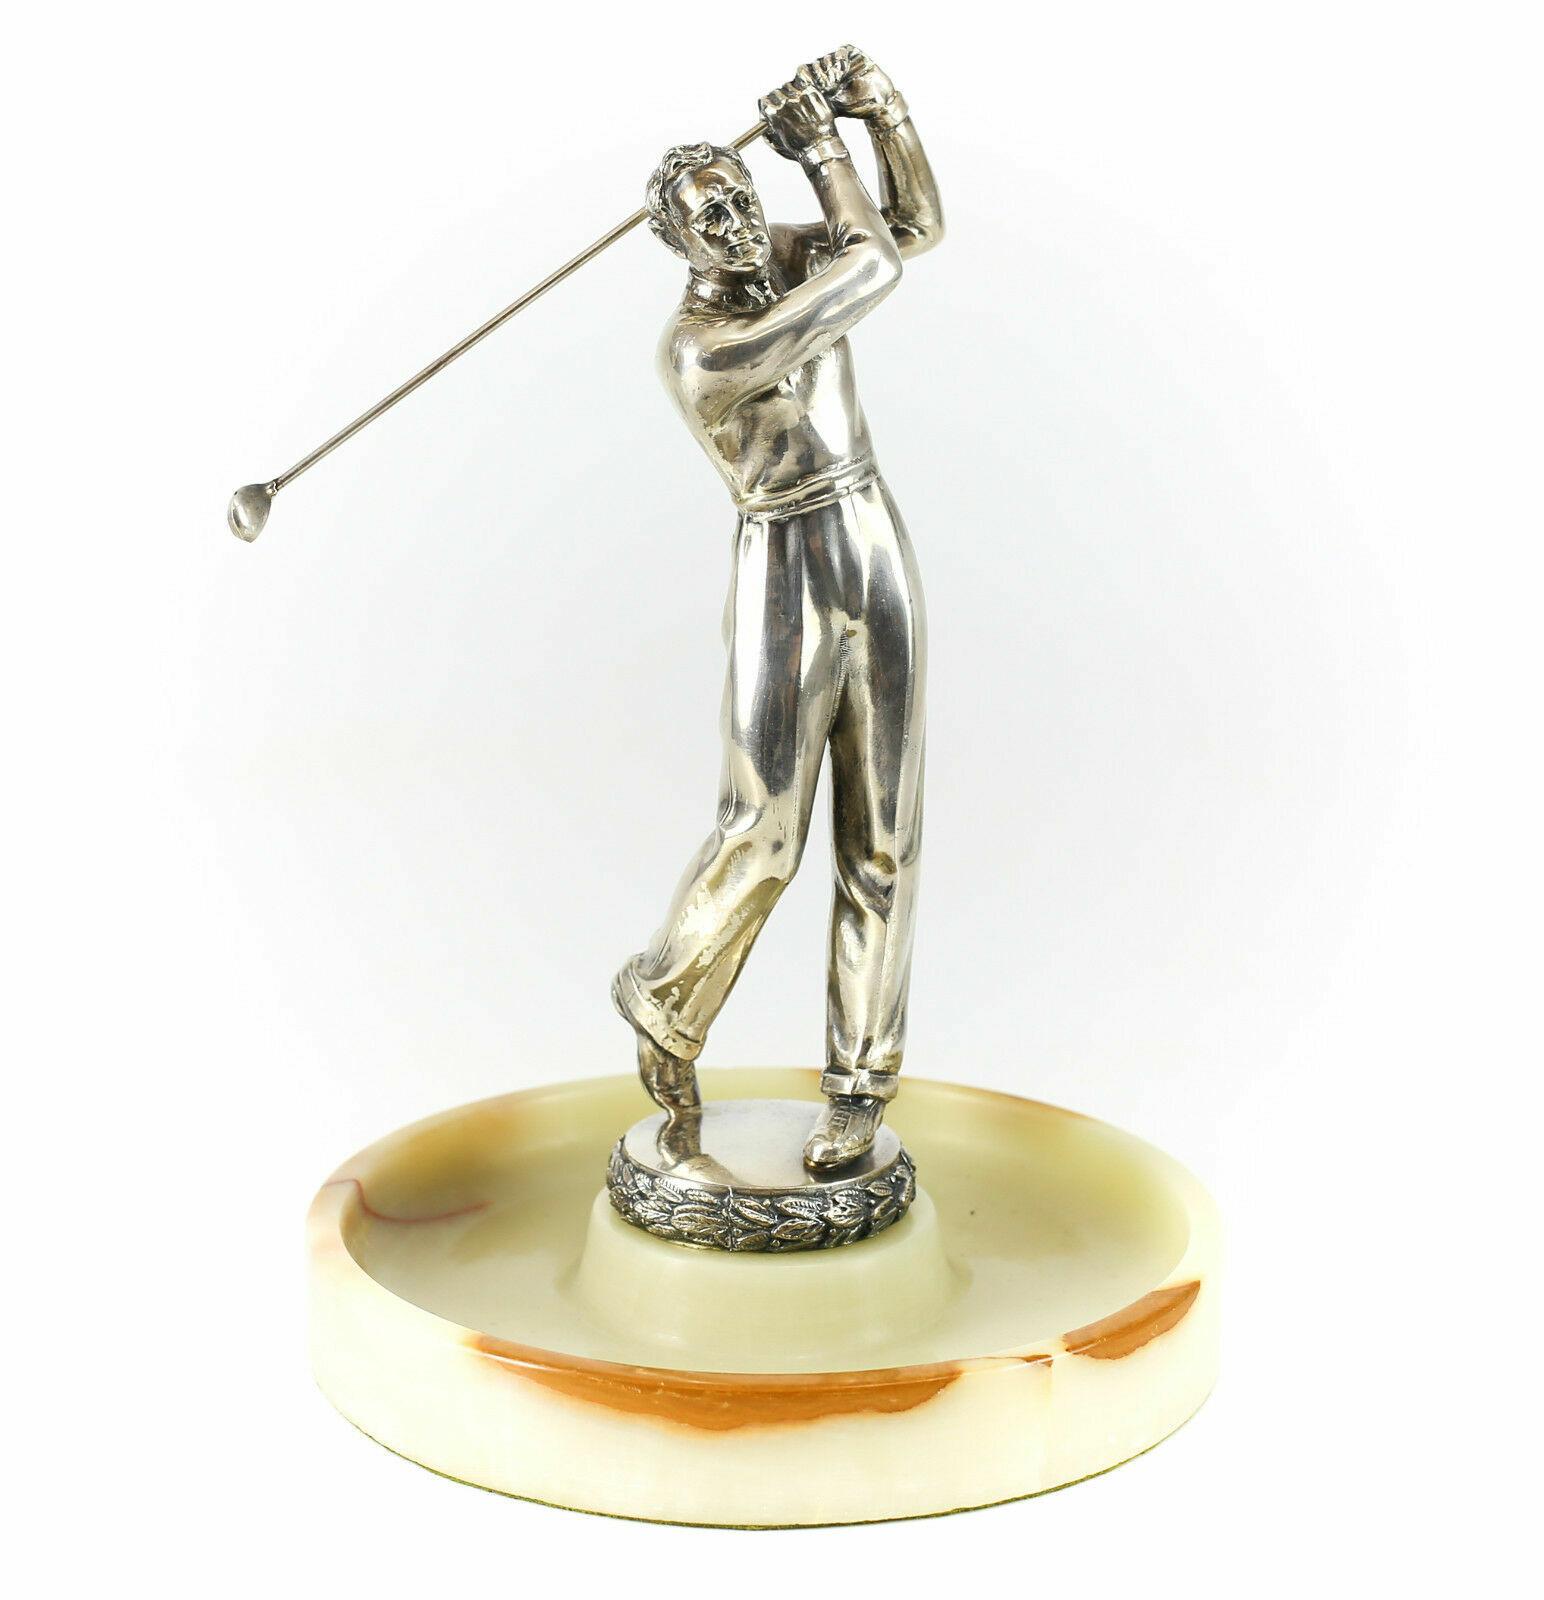 20th Century American Hand Chased Silverplate Golf Figurine Desk Caddy Marble Base, c1930 For Sale